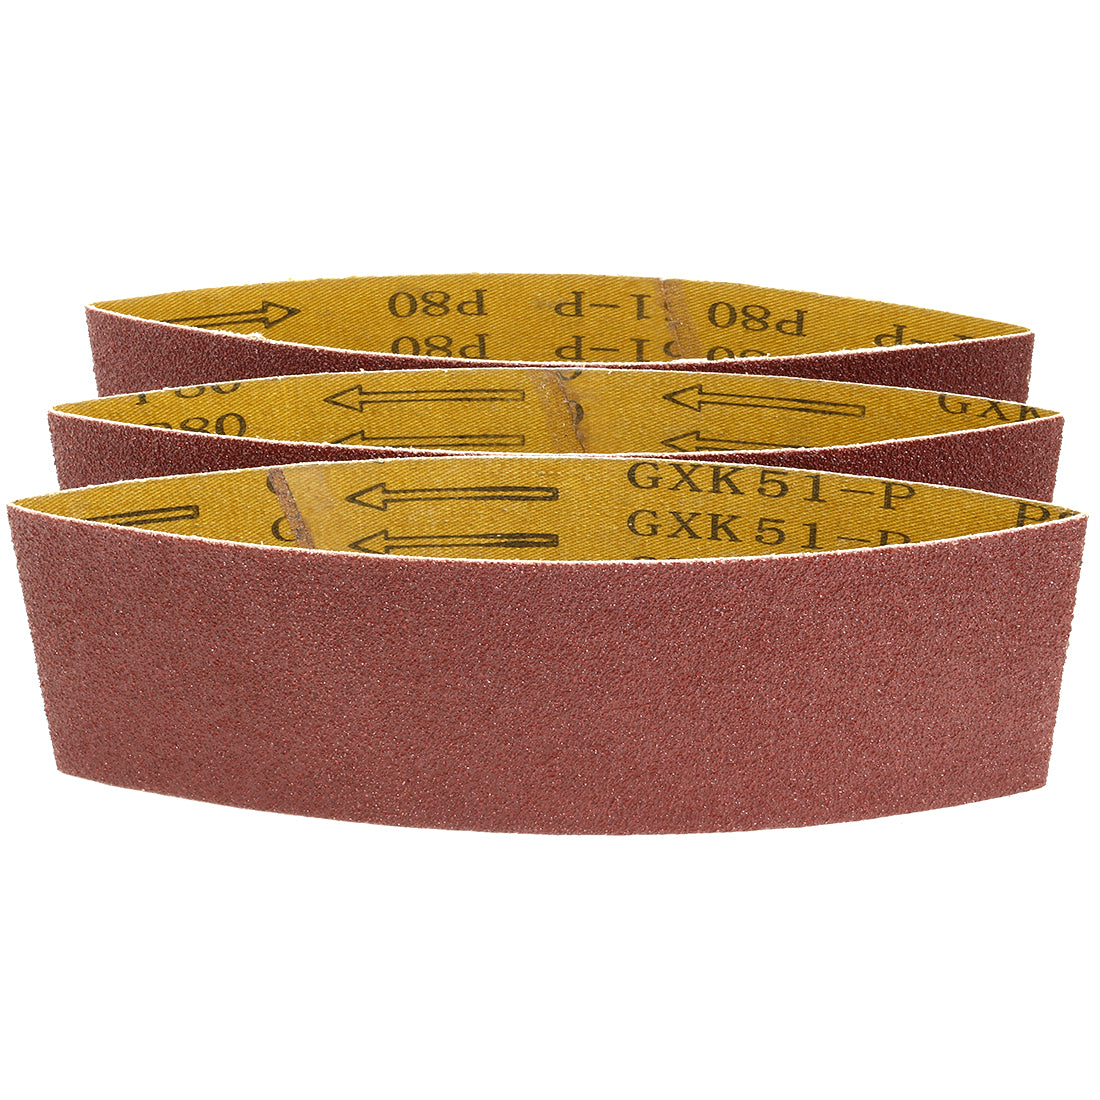 uxcell Uxcell 3-Inch x 18-Inch Aluminum Oxide Sanding Belt 80 Grits Lapped Joint 3pcs